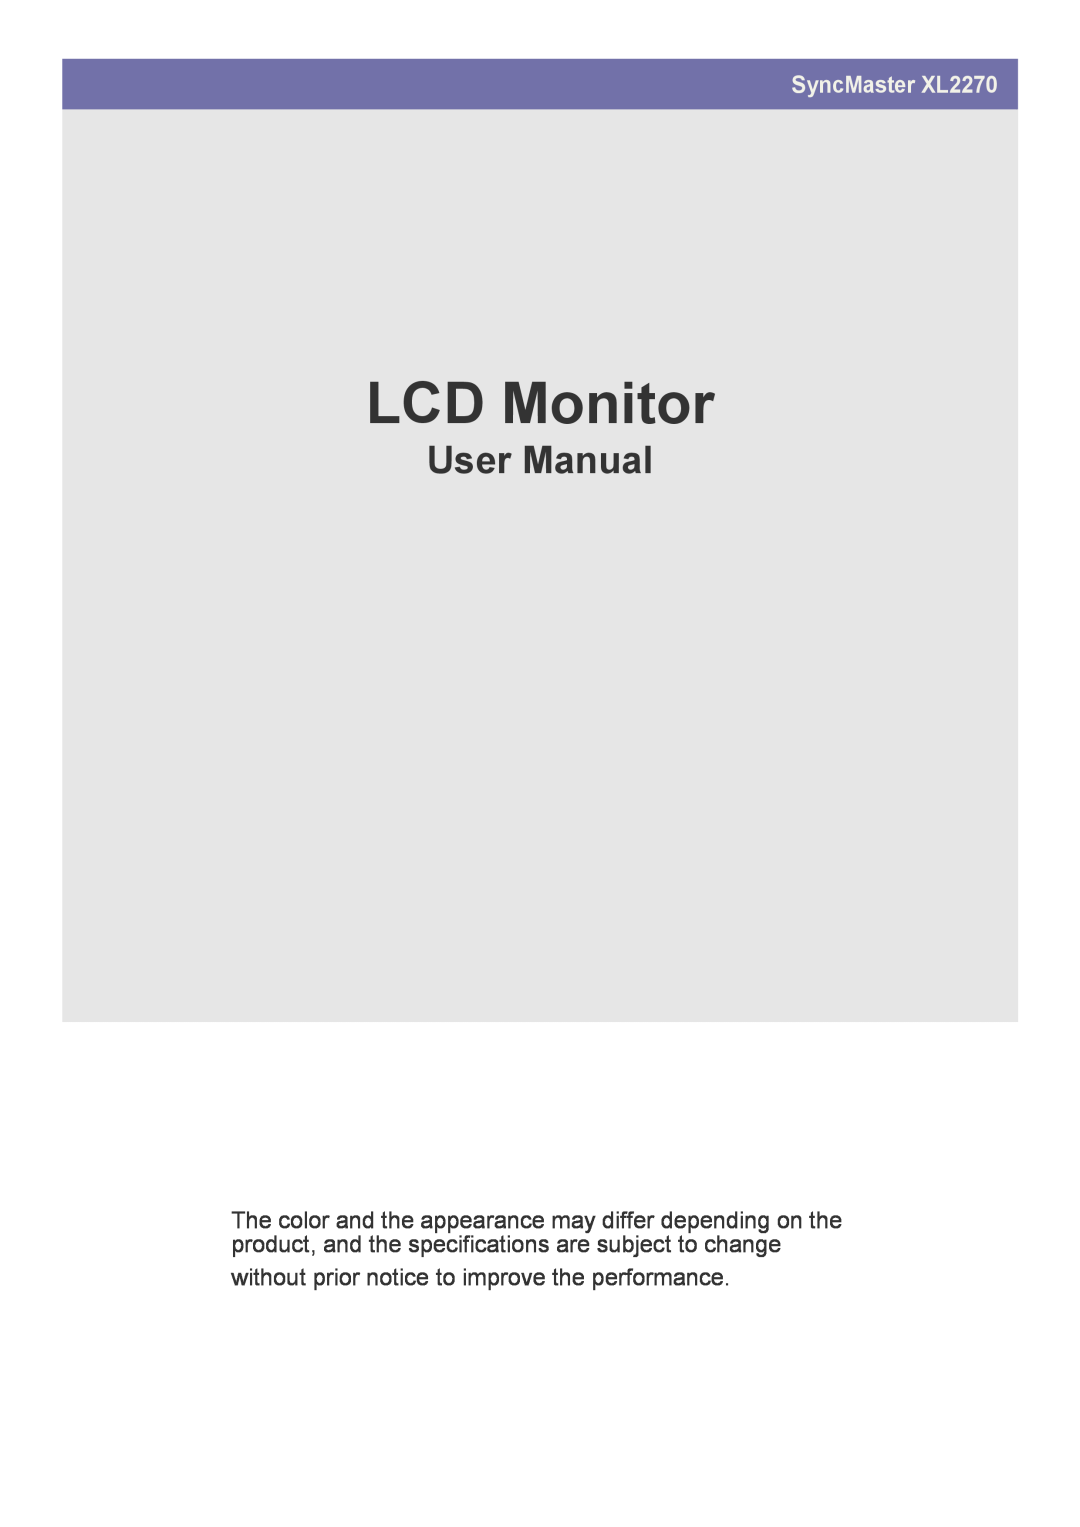 Samsung user manual LCD Monitor, User Manual, SyncMaster XL2270, without prior notice to improve the performance 